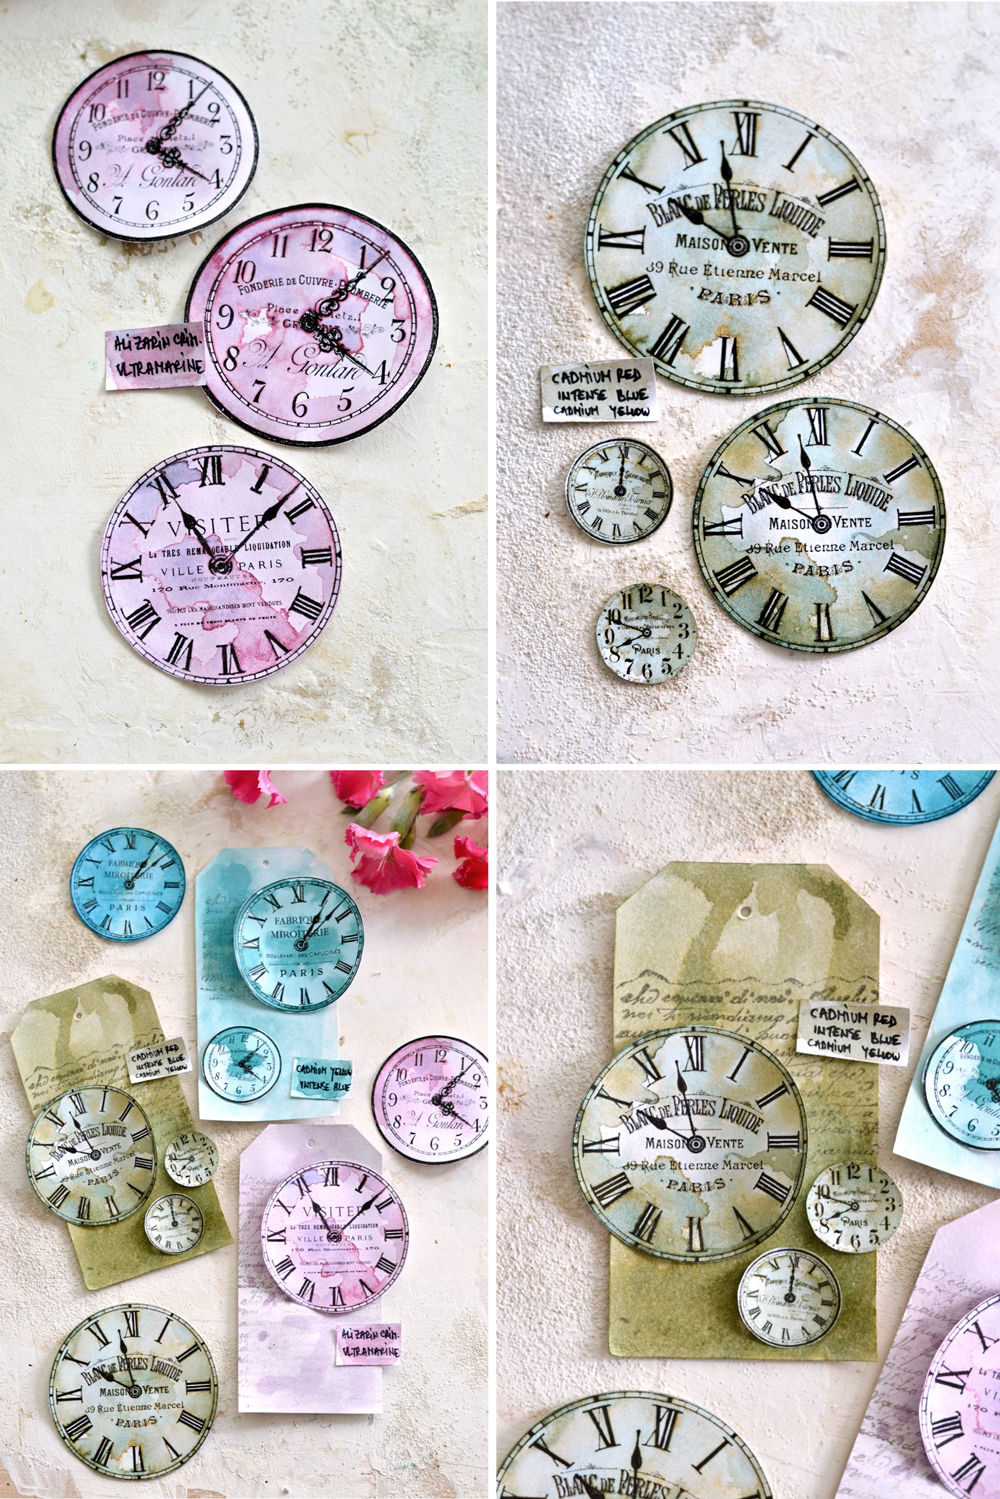 Clock faces in different sizes and colors